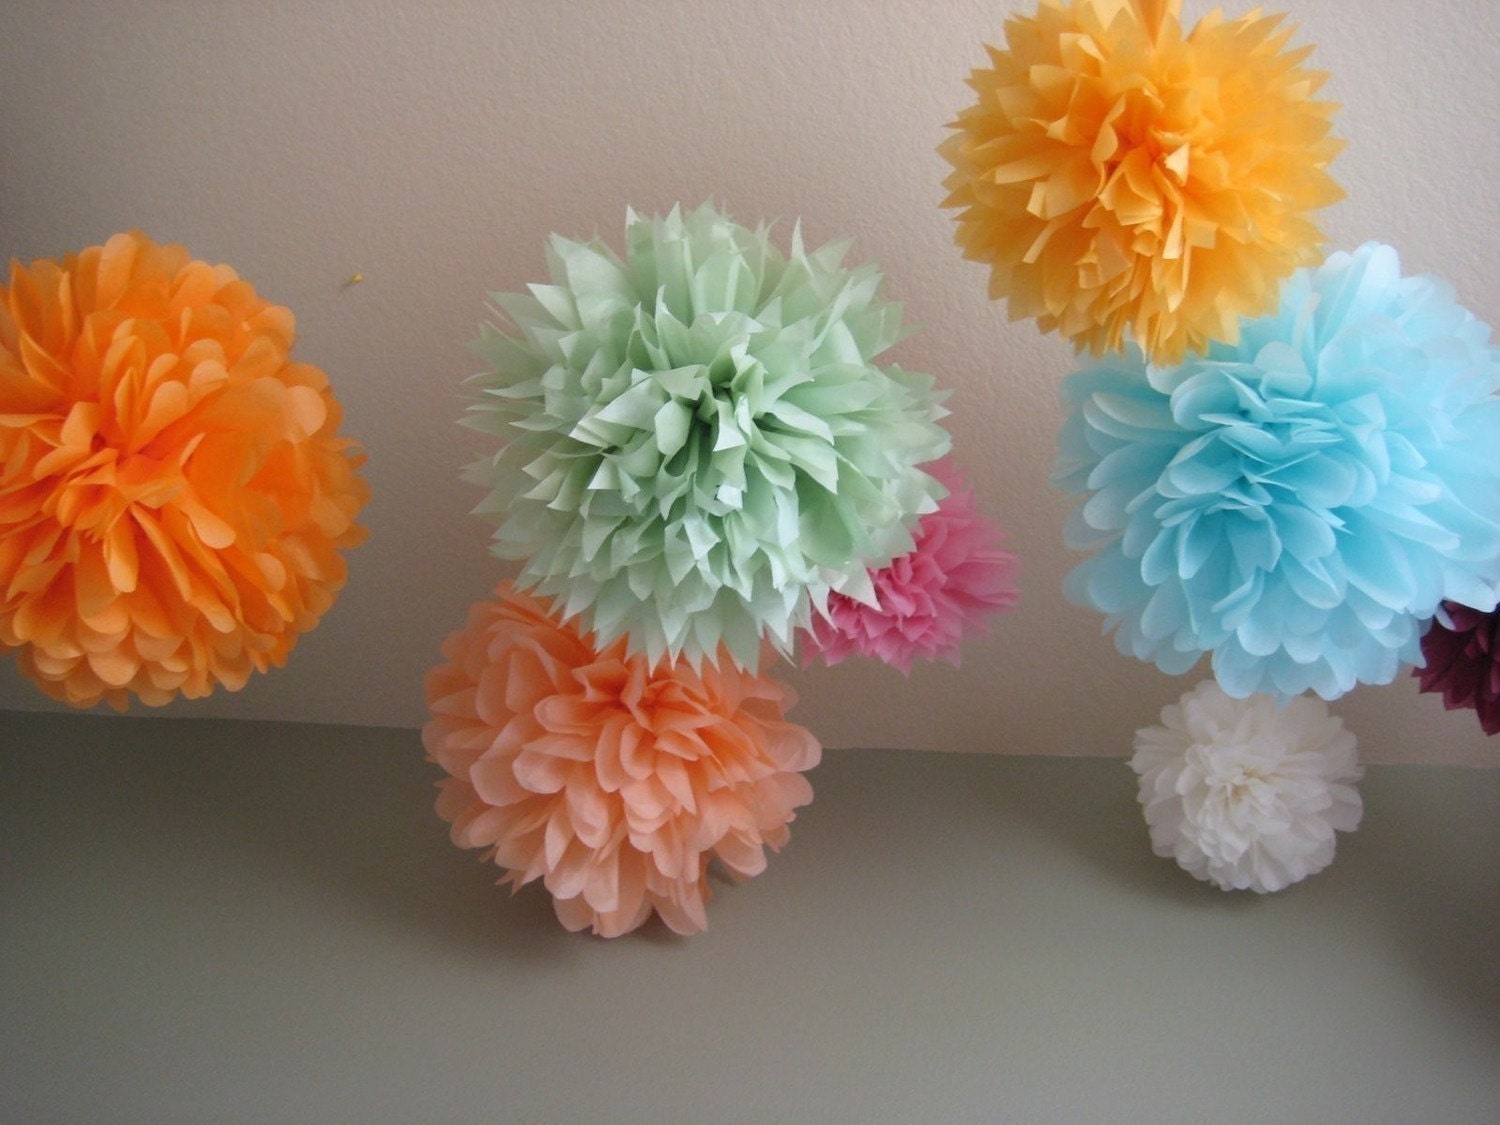 SALE - 5 Tissue Pom Kit - Pick your colors - As Seen in Gossip Girl - prosttothehost